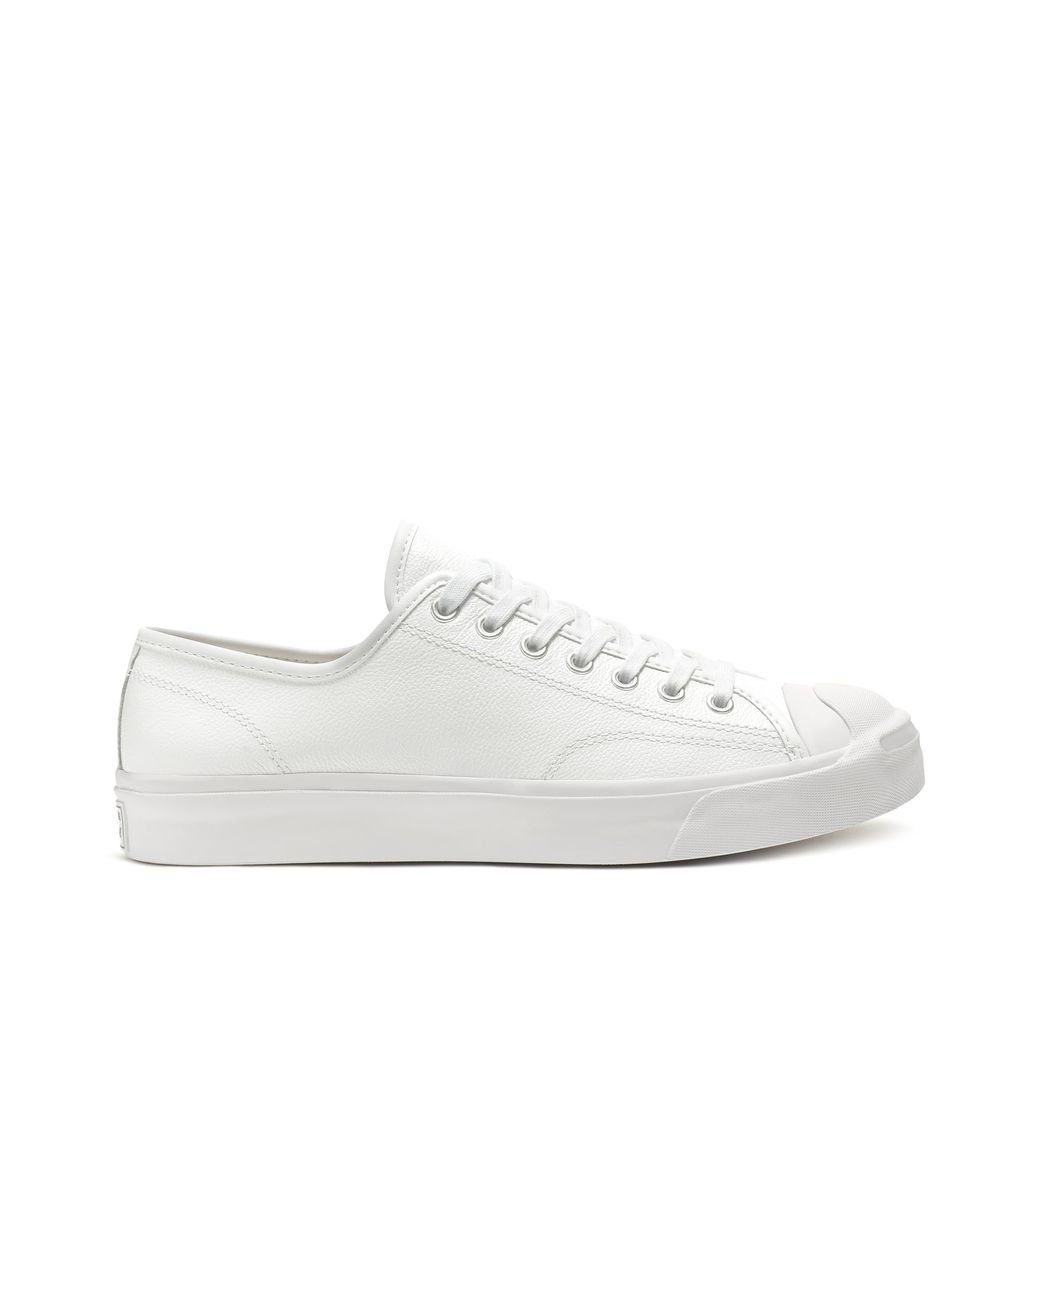 converse jack purcell tumbled leather ox sneaker